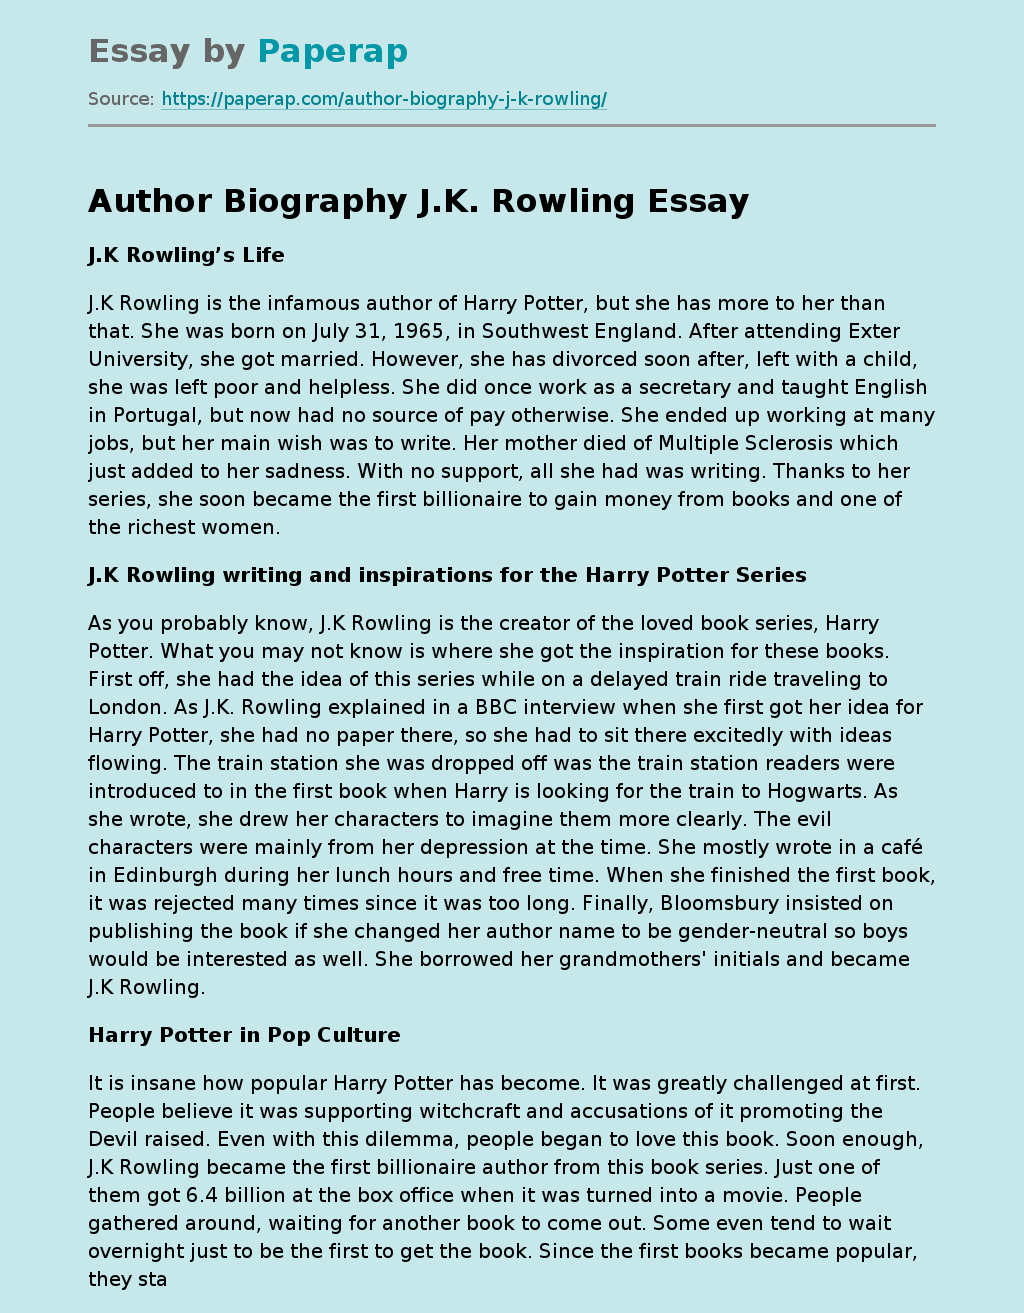 Author Biography J.K. Rowling